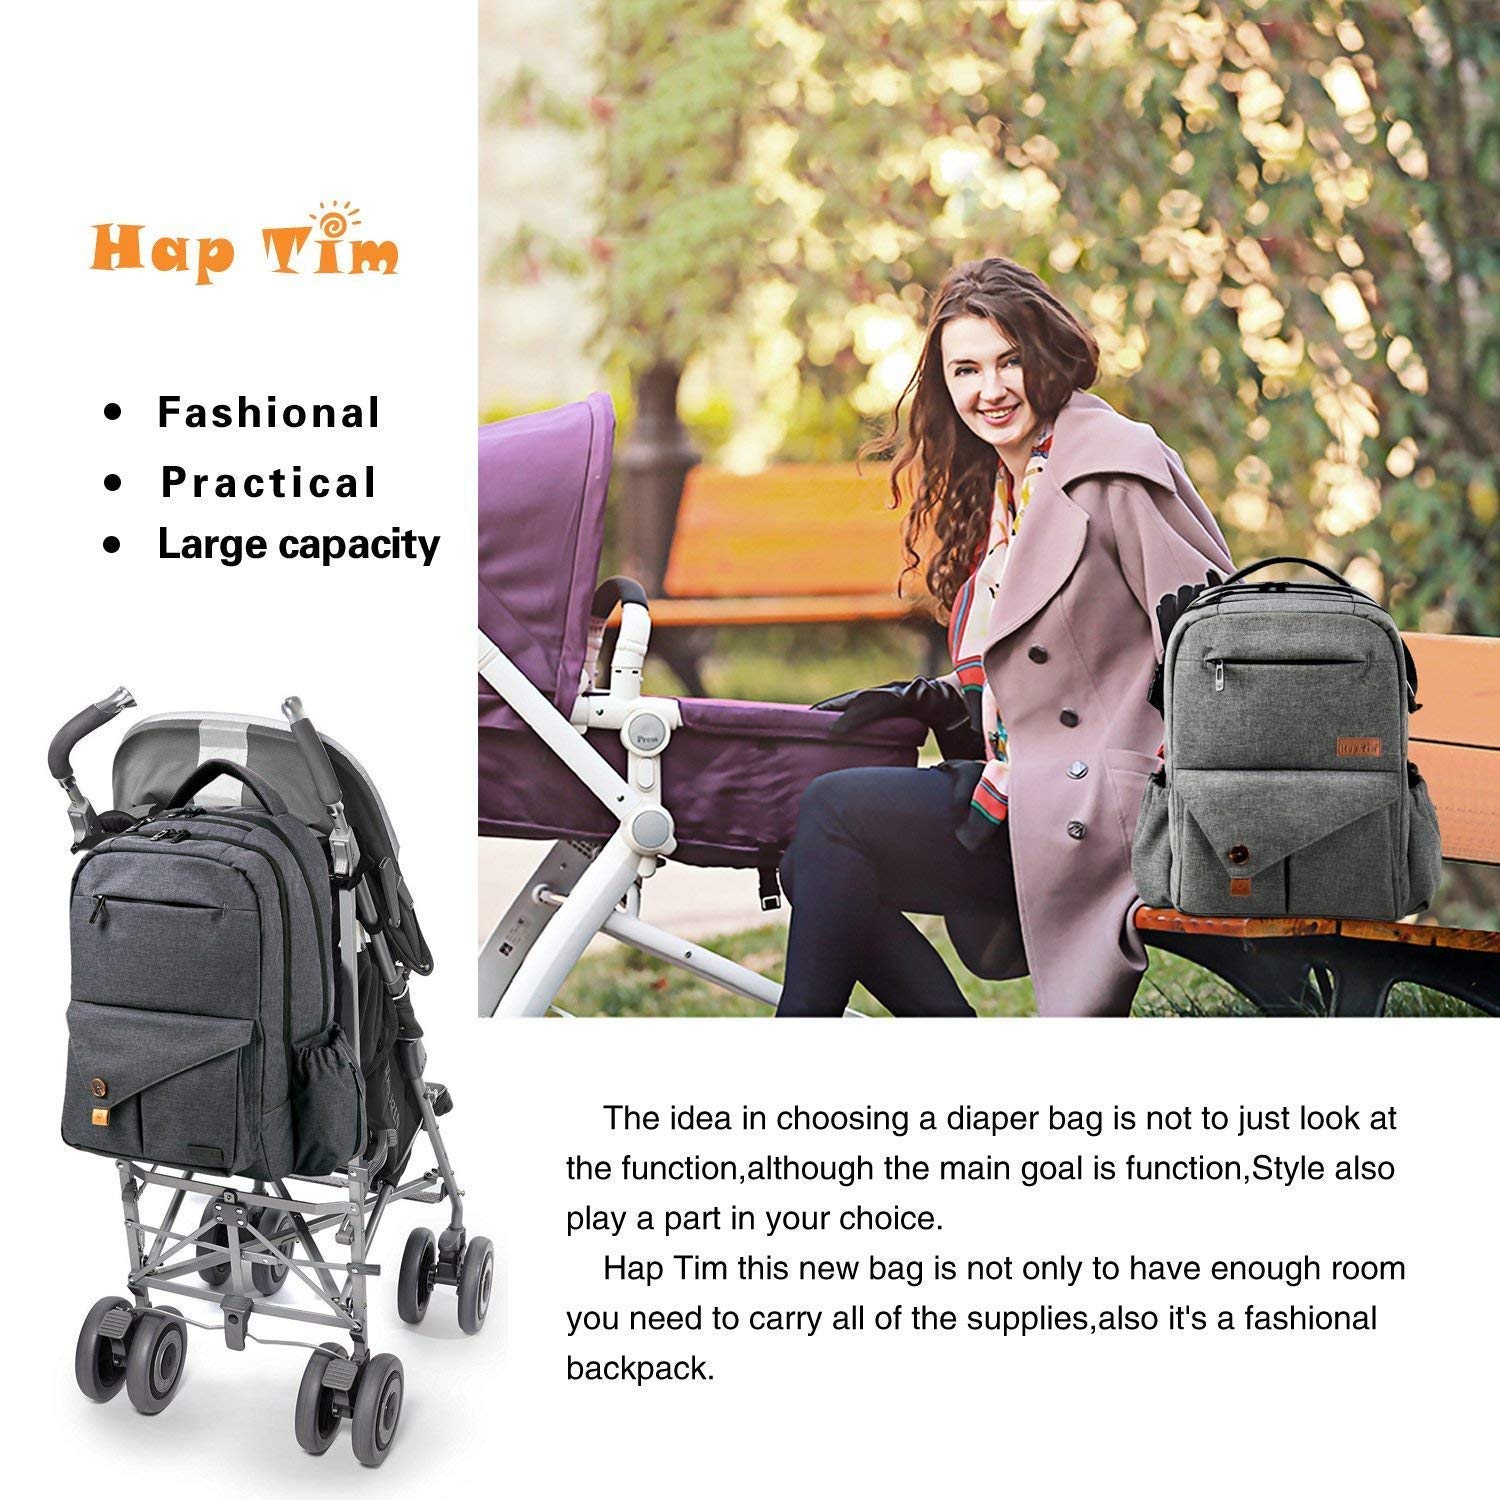 Hap Tim Multi-function Large Baby Diaper Bag Backpack W/Stroller Straps-Insulated Bottle Pockets-Changing Pad,Stylish & Durable(Dark Gray-5284)